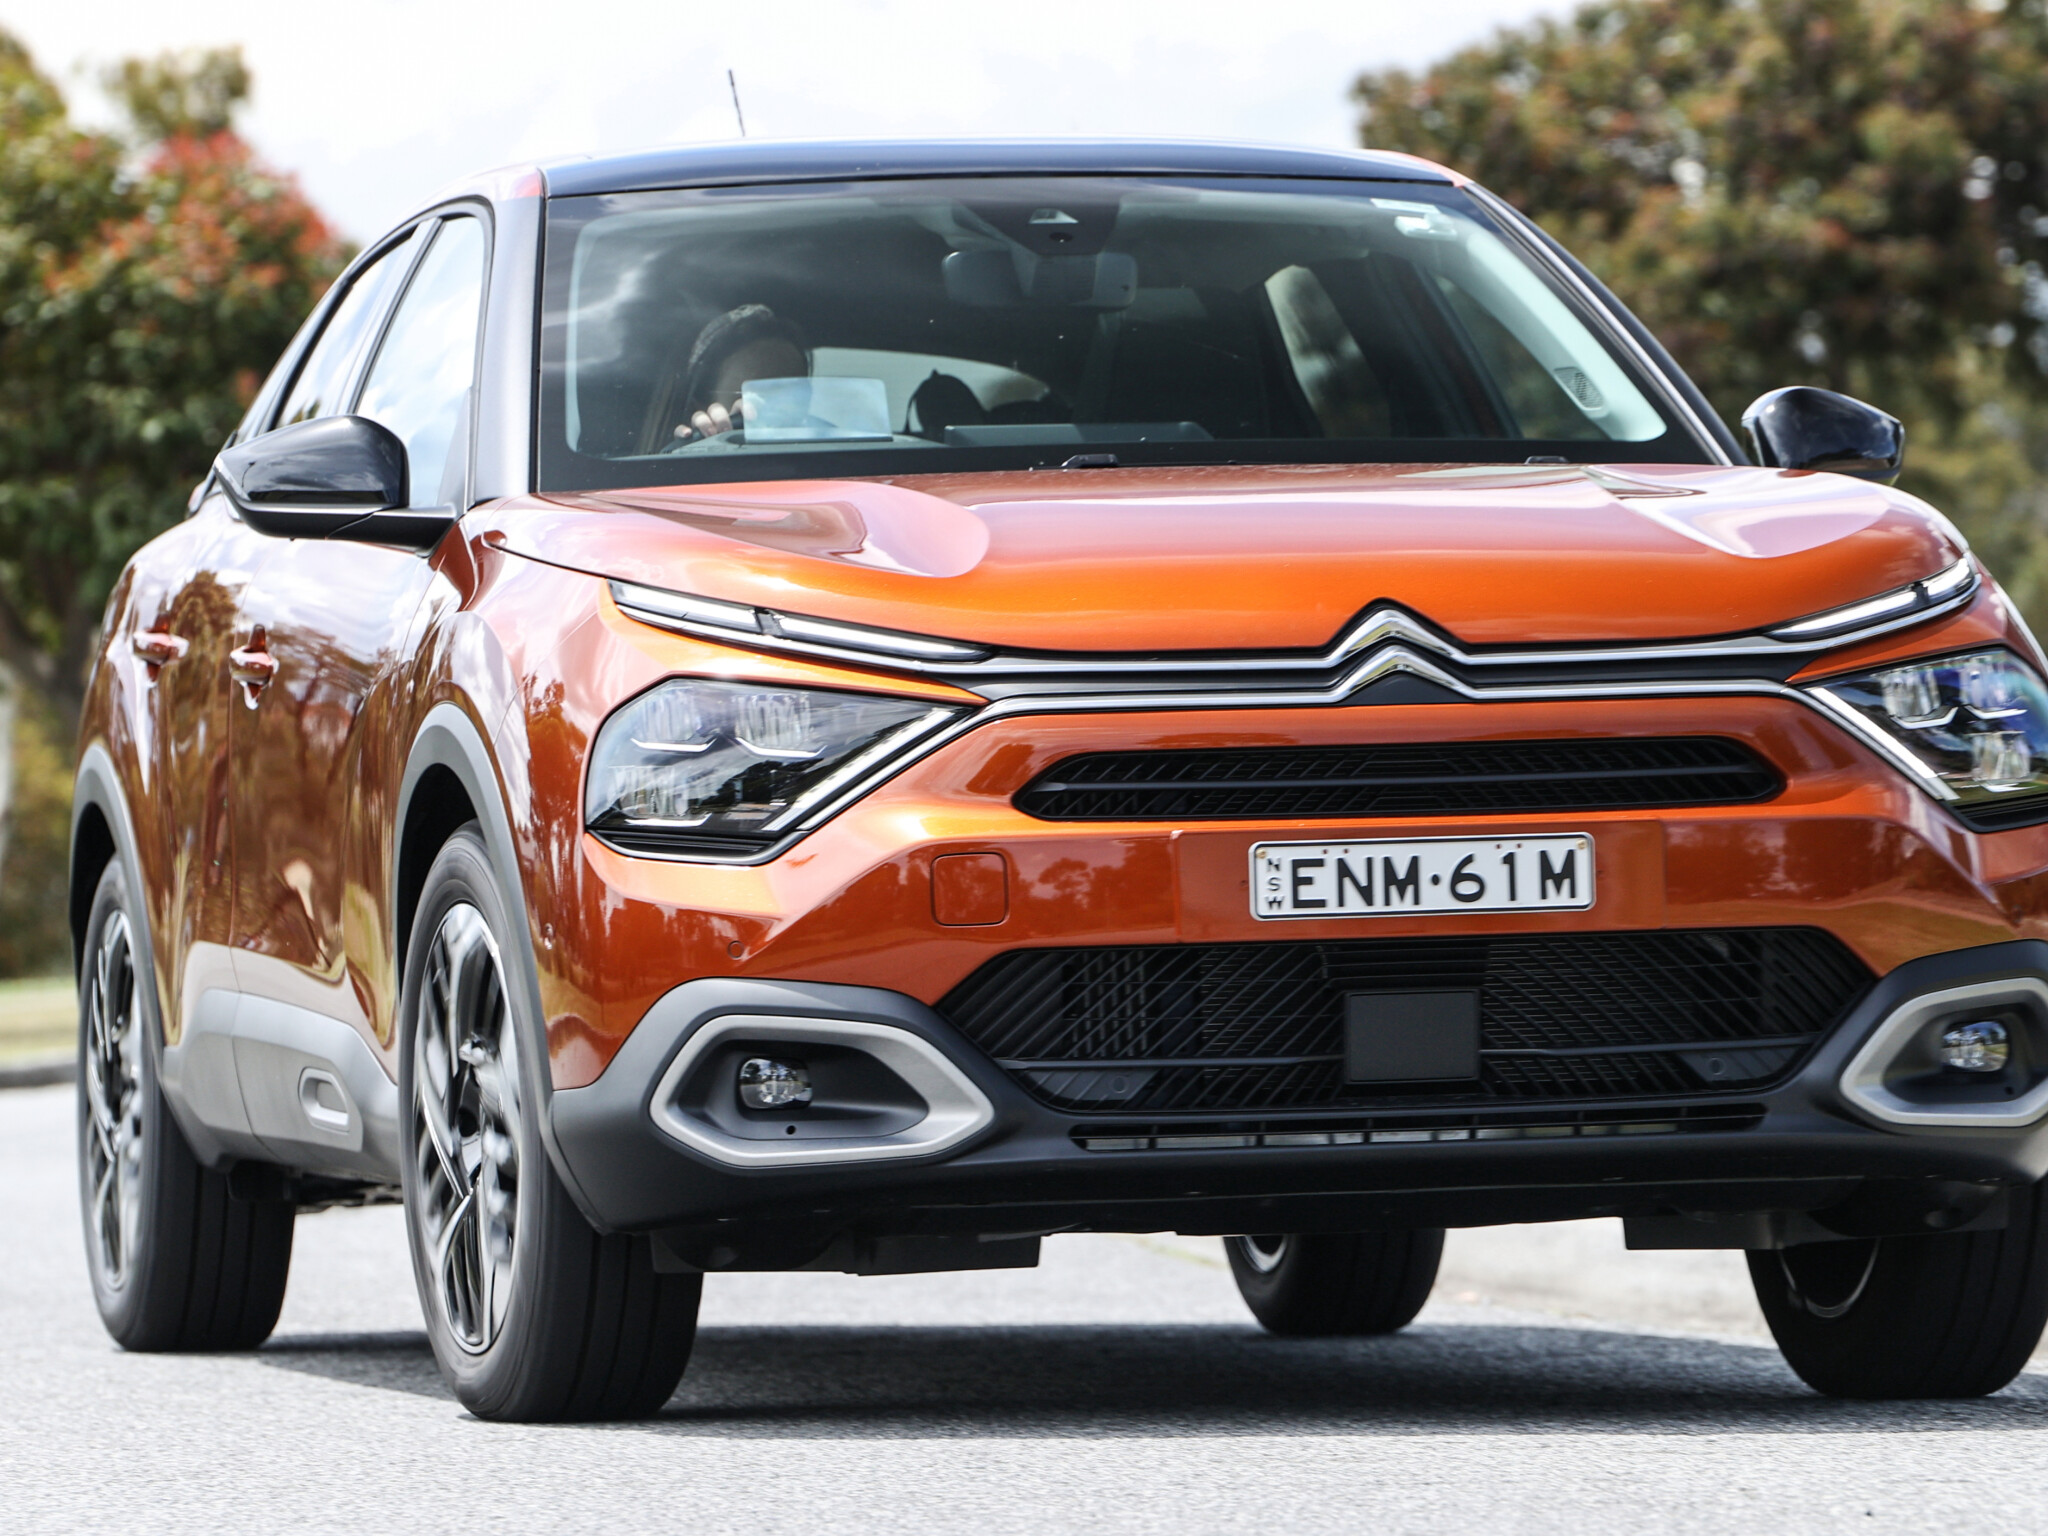 The end is nearing for the Citroen C4 Cactus